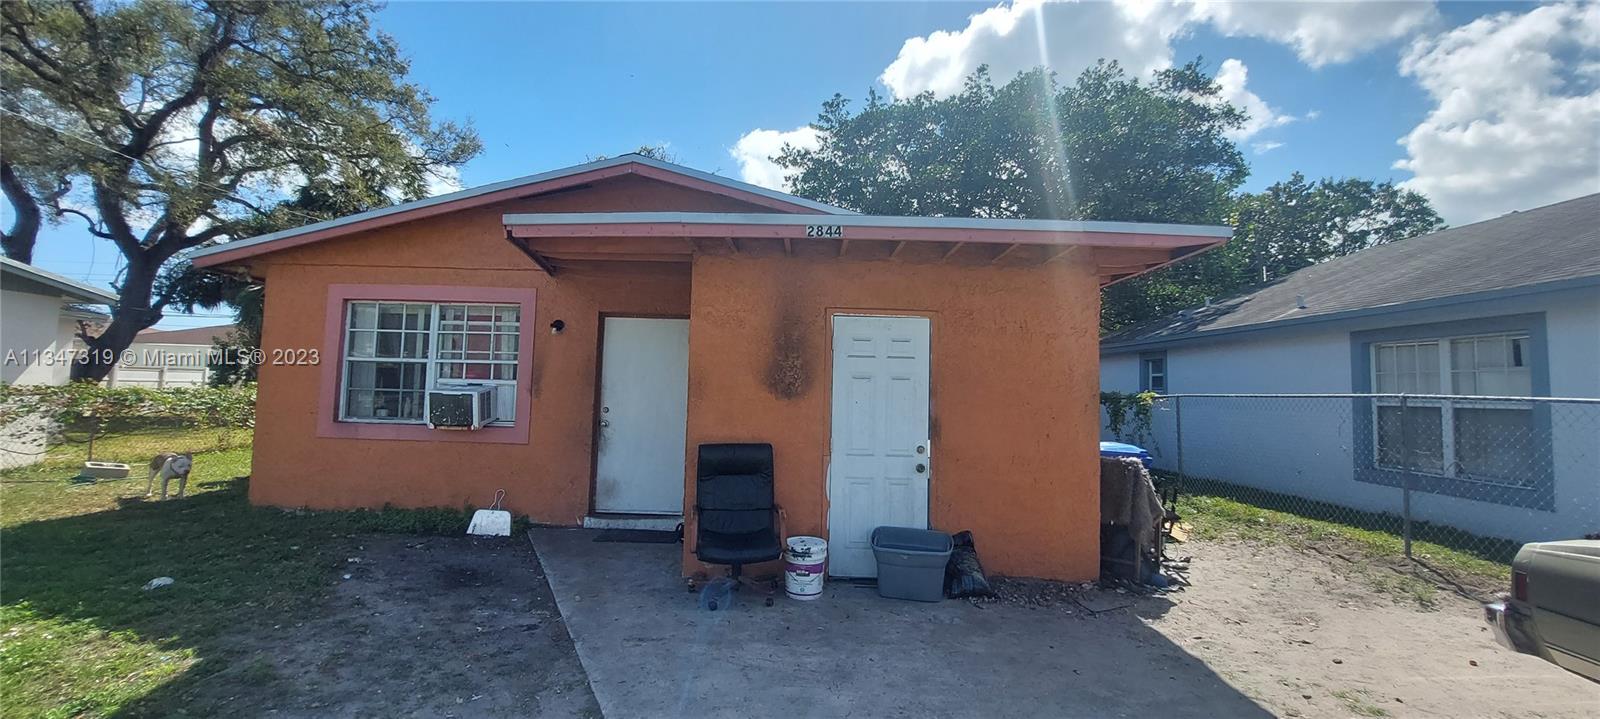 2844 NW 8th St  For Sale A11347319, FL